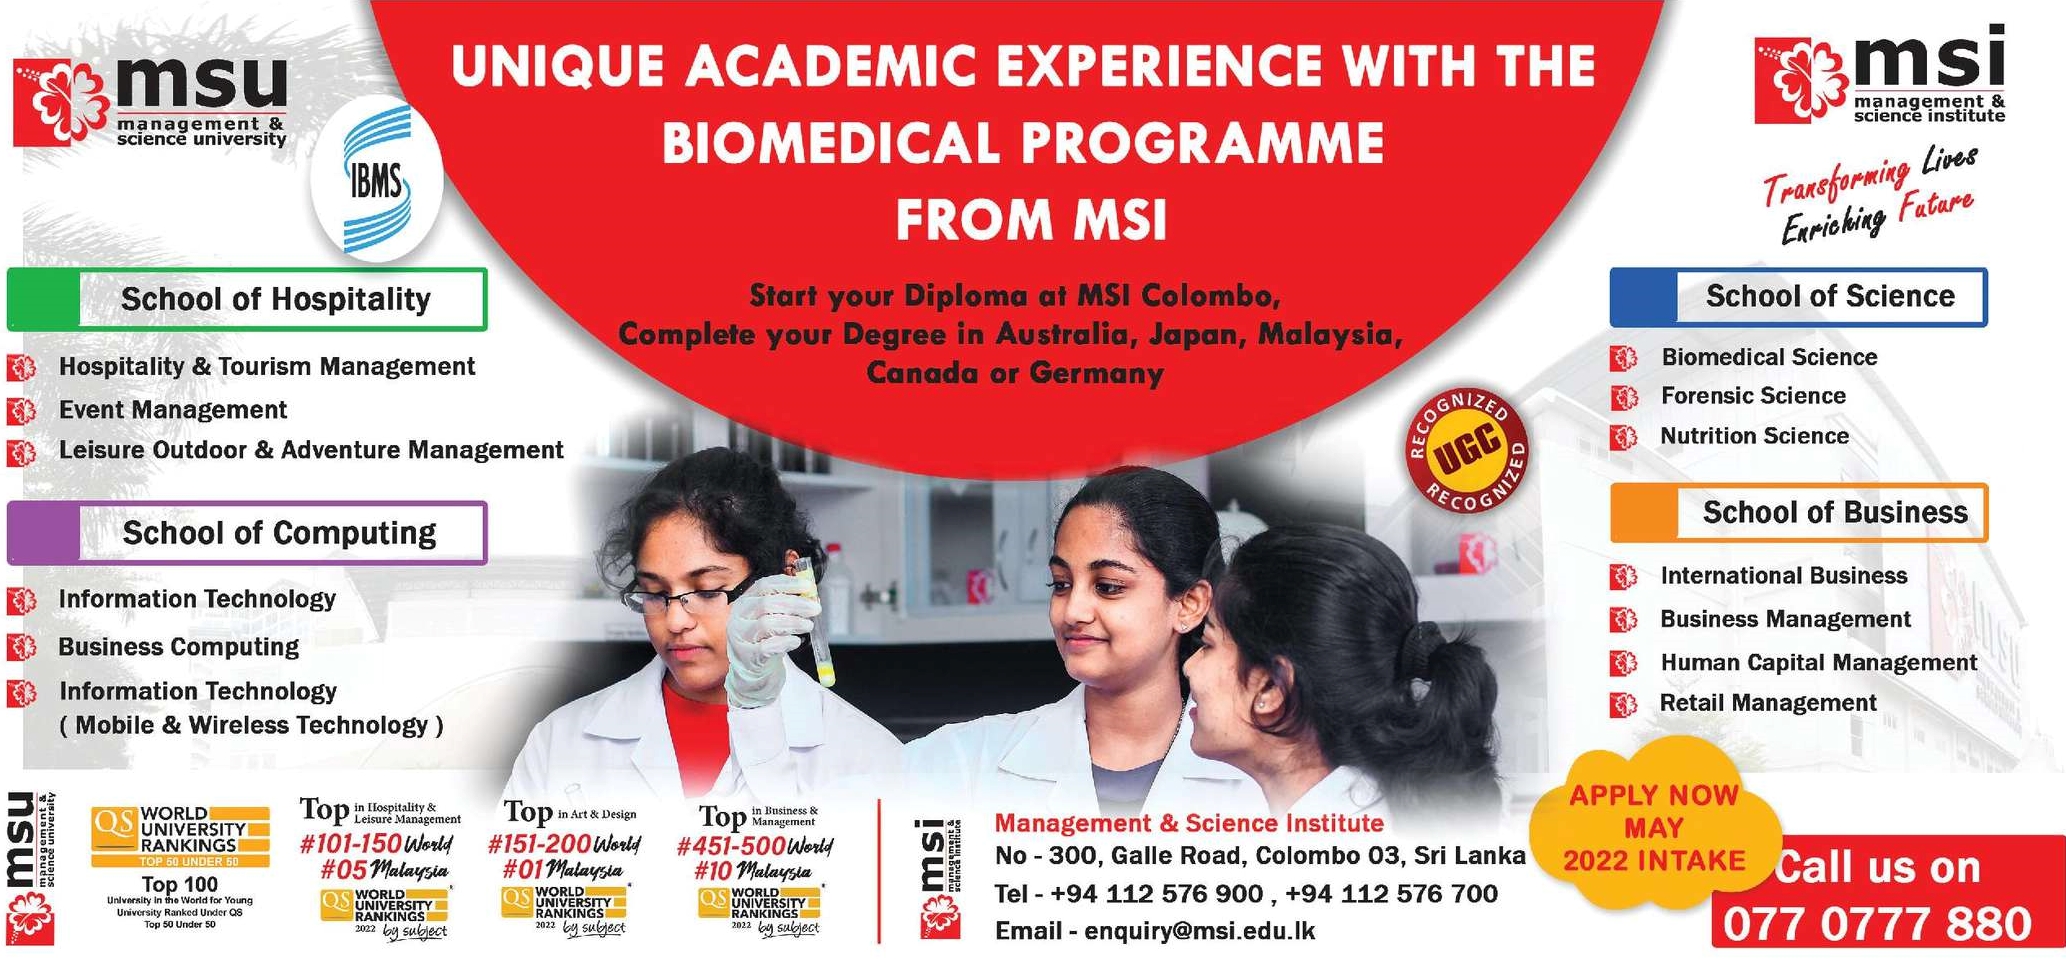 Biomedical Degree Programme in MSU Management and Science Institute